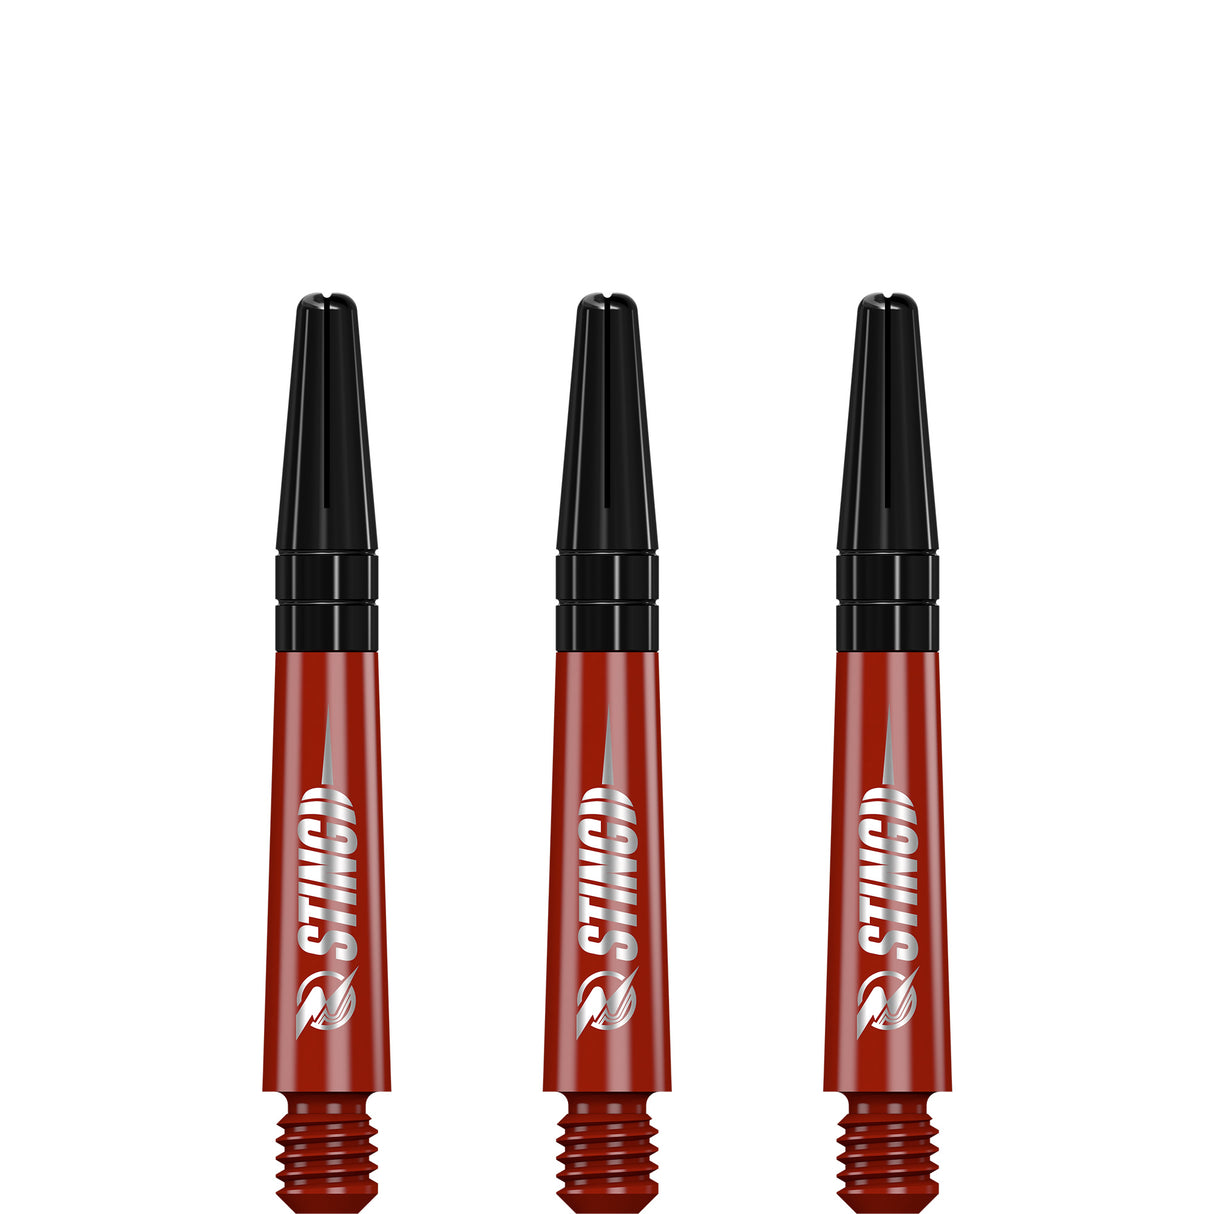 Ruthless Sting Dart Shafts - Polycarbonate - Solid Red - Black Top